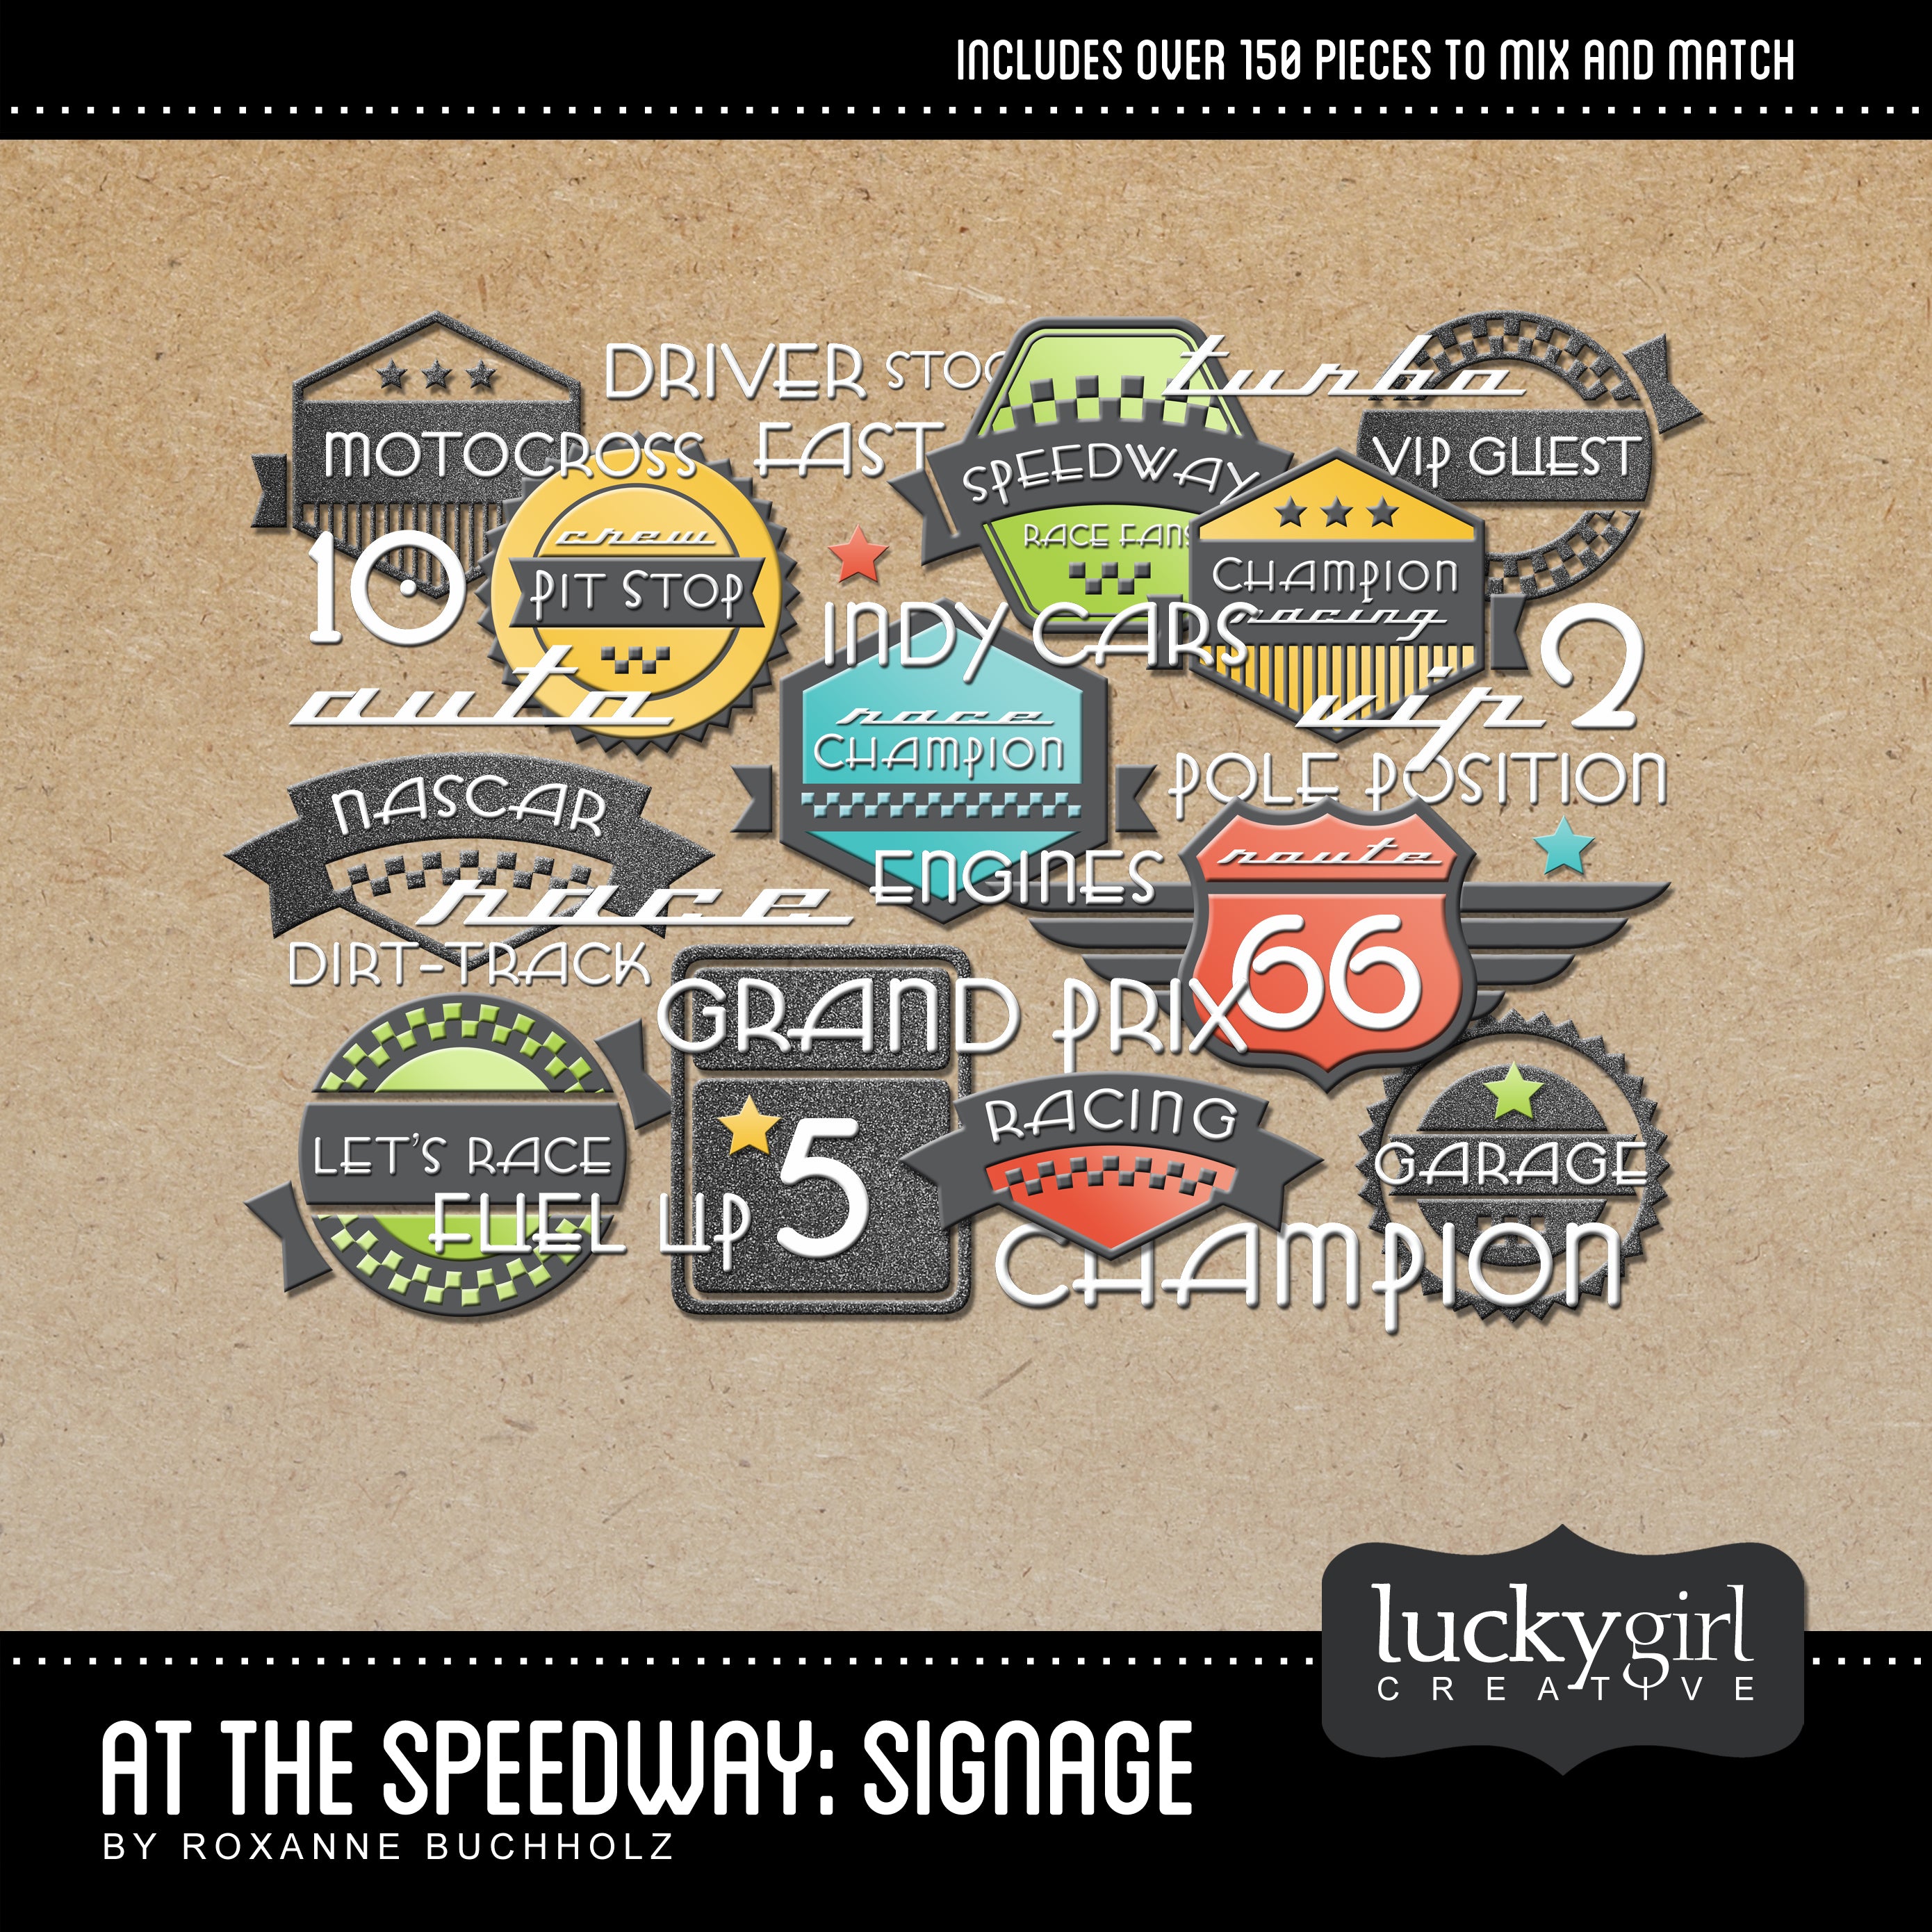 At the Speedway Signage Digital Scrapbook Kit by Lucky Girl Creative contains digital art labels, stamps, word art, and everything you could want to create your own custom word art and titles. The style and colors coordinate perfectly with the rest of the At the Speedway Digital Scrapbook Kit collections.